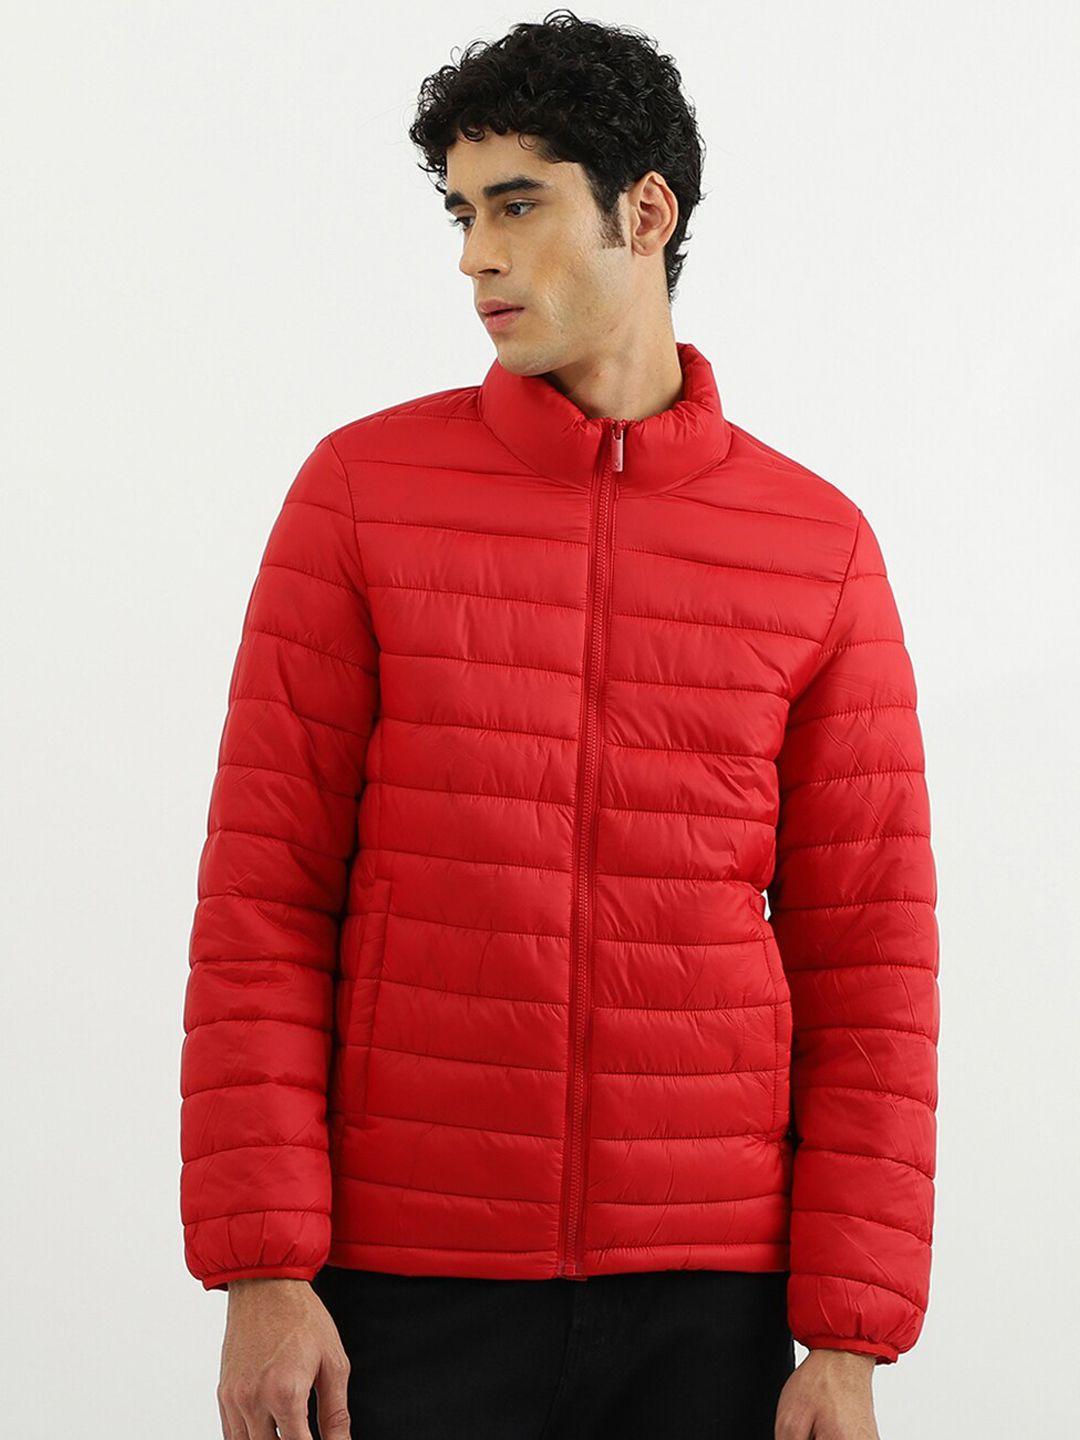 united colors of benetton men red puffer jacket